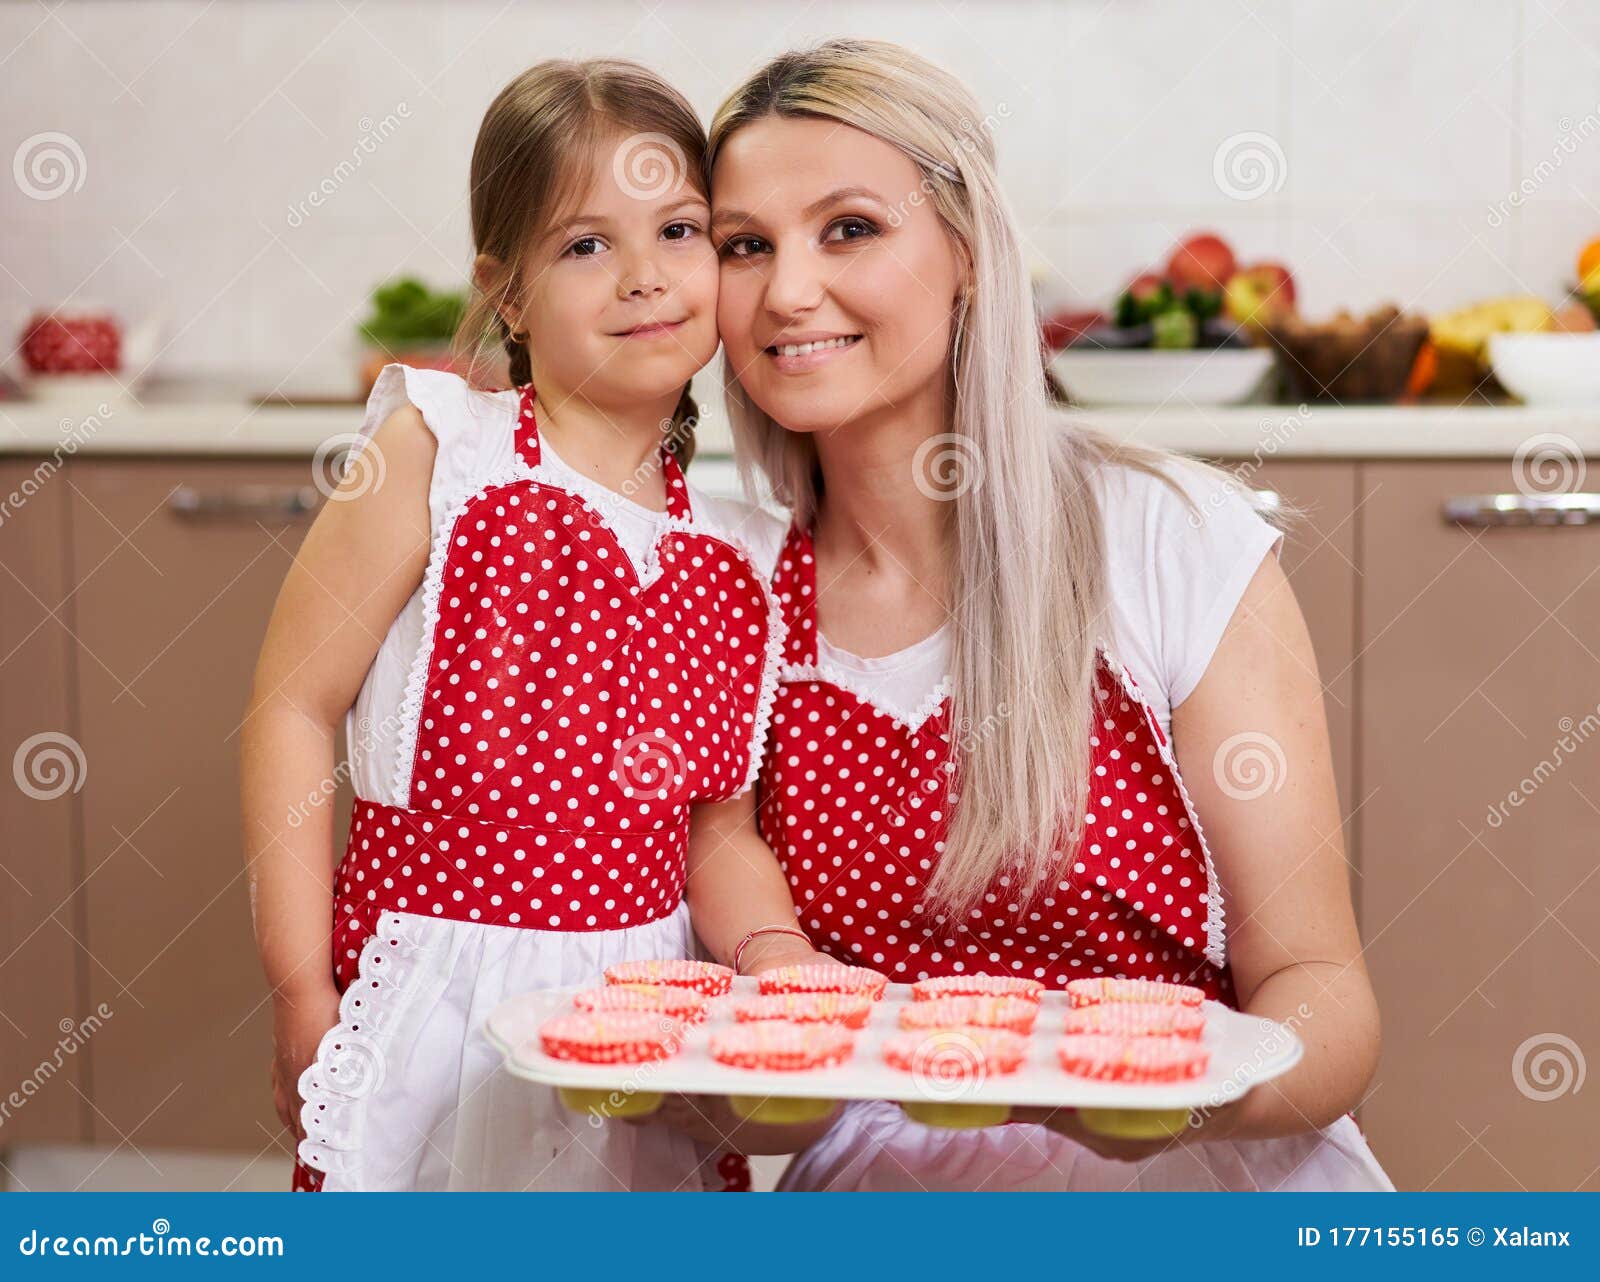 Mother And Daughter In The Kitchen Stock Image Image Of Adult Food 177155165 